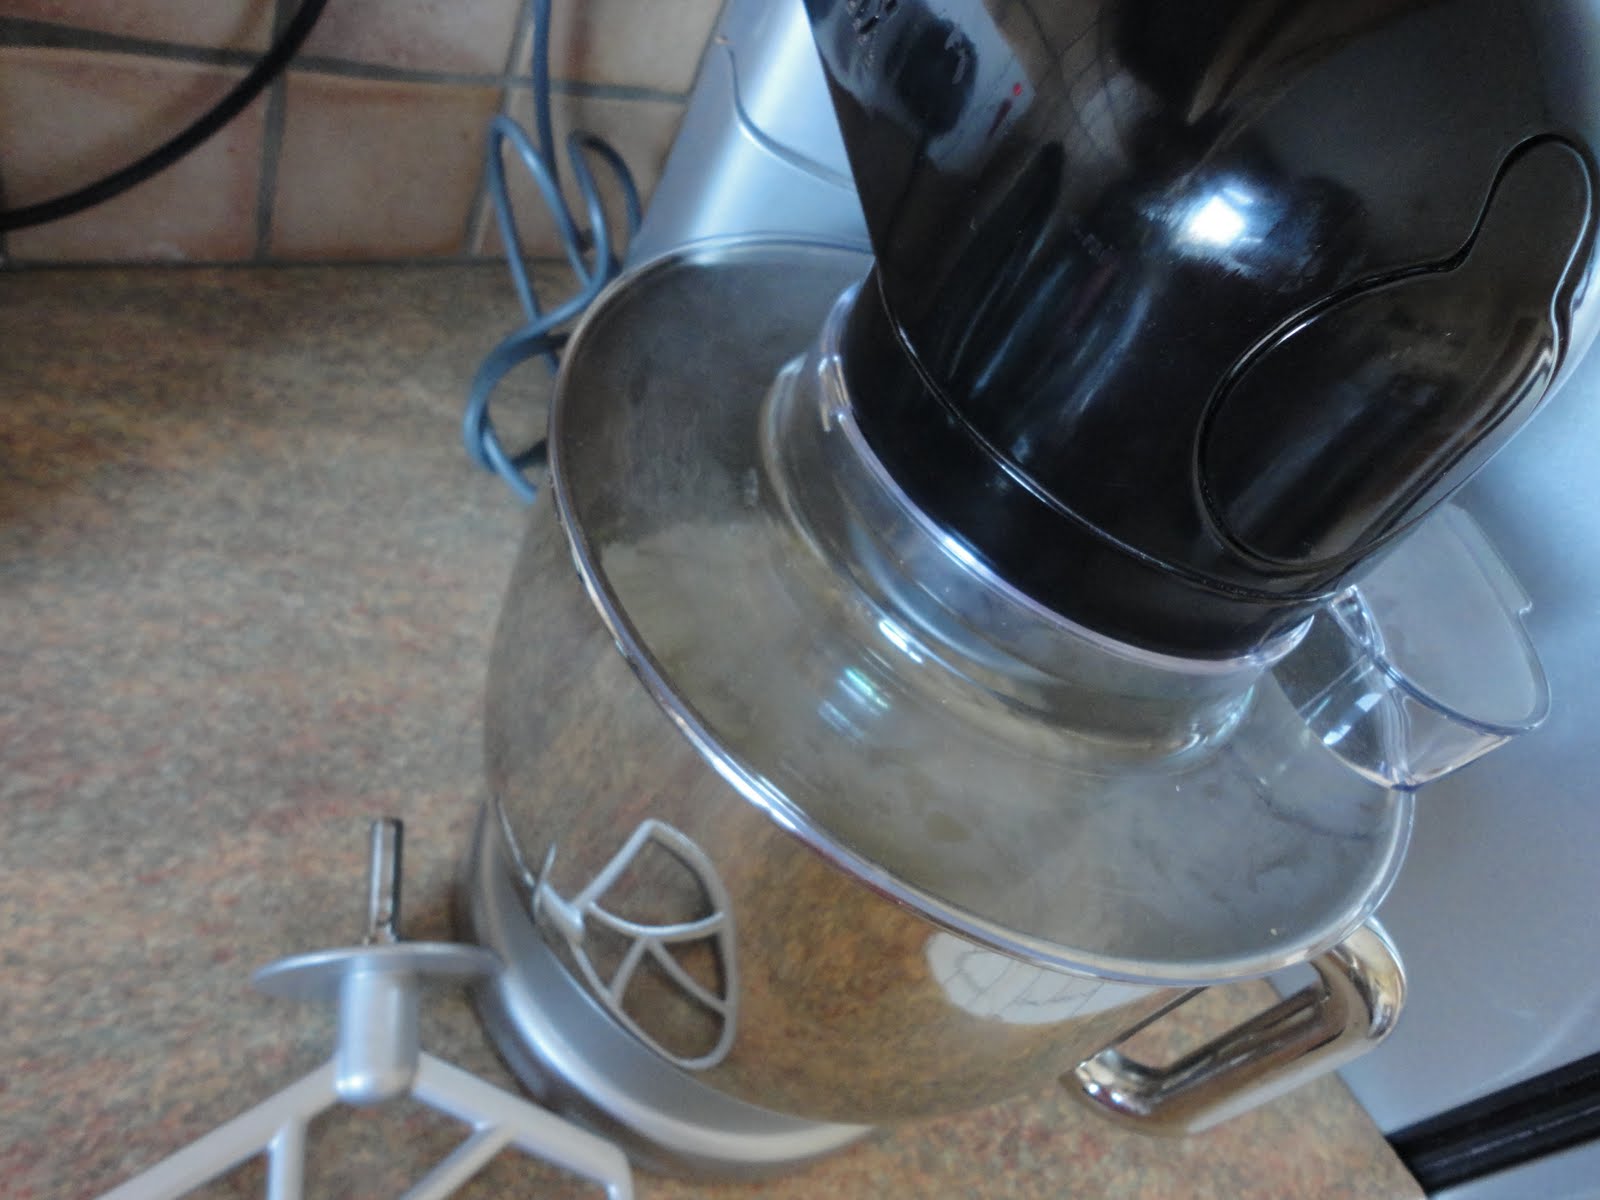 Kenwood kMix Editions stand mixer review